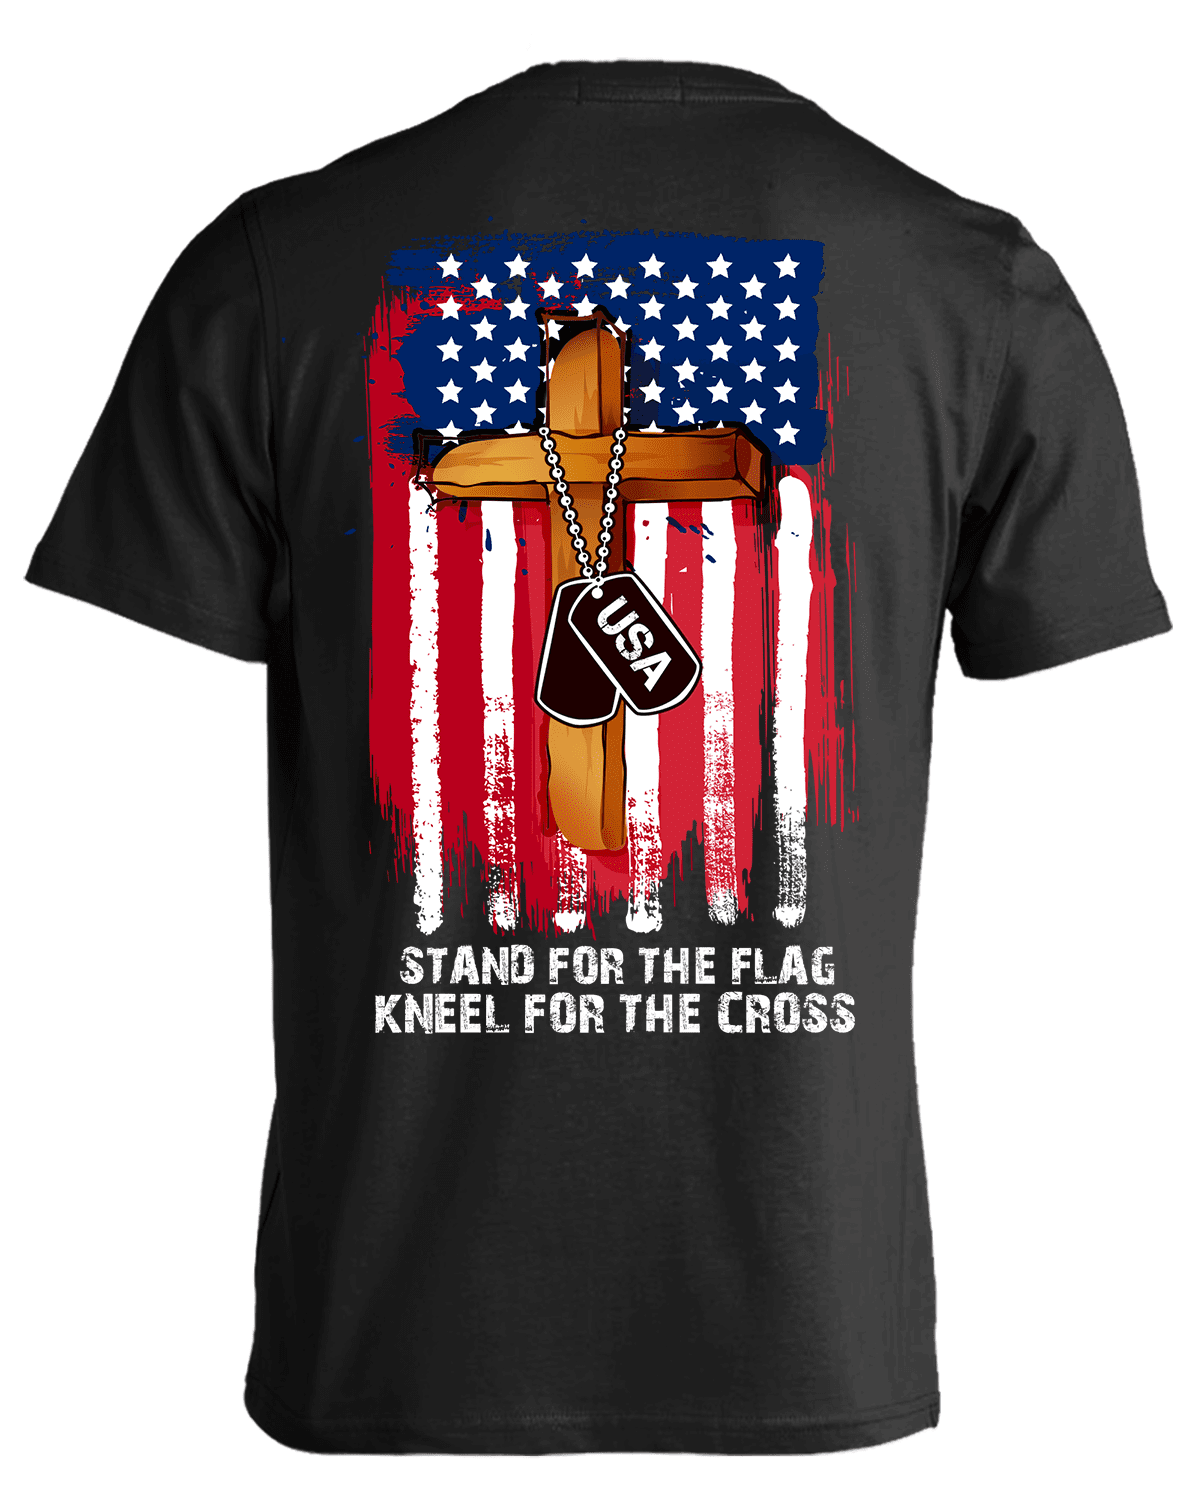 Veterans Day T-Shirt - Stand For The Flag, Kneel For The Cross T-Shirt, Cotton, Black - American Legend Rider